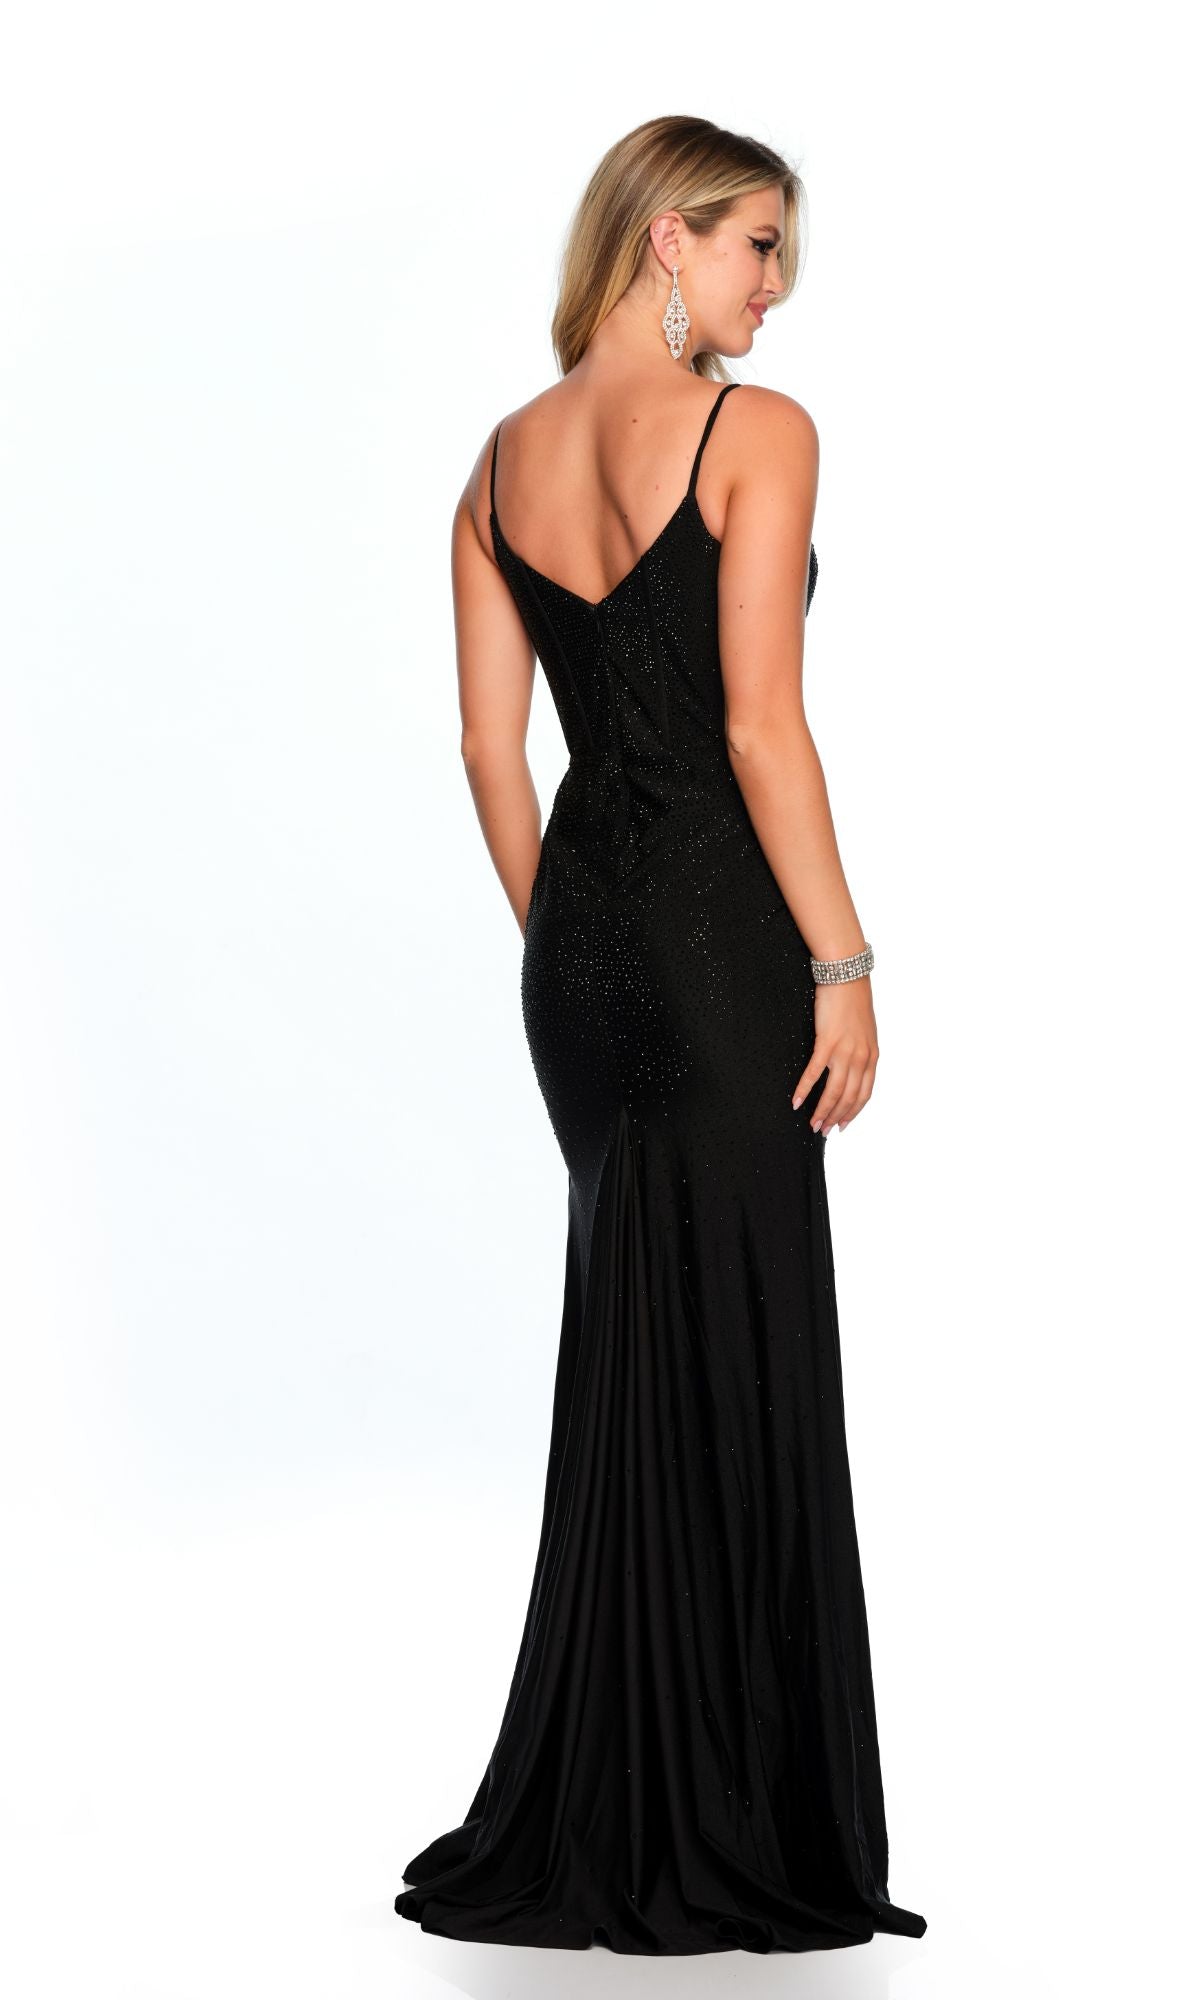 Long Formal Dress 11576 by Dave and Johnny